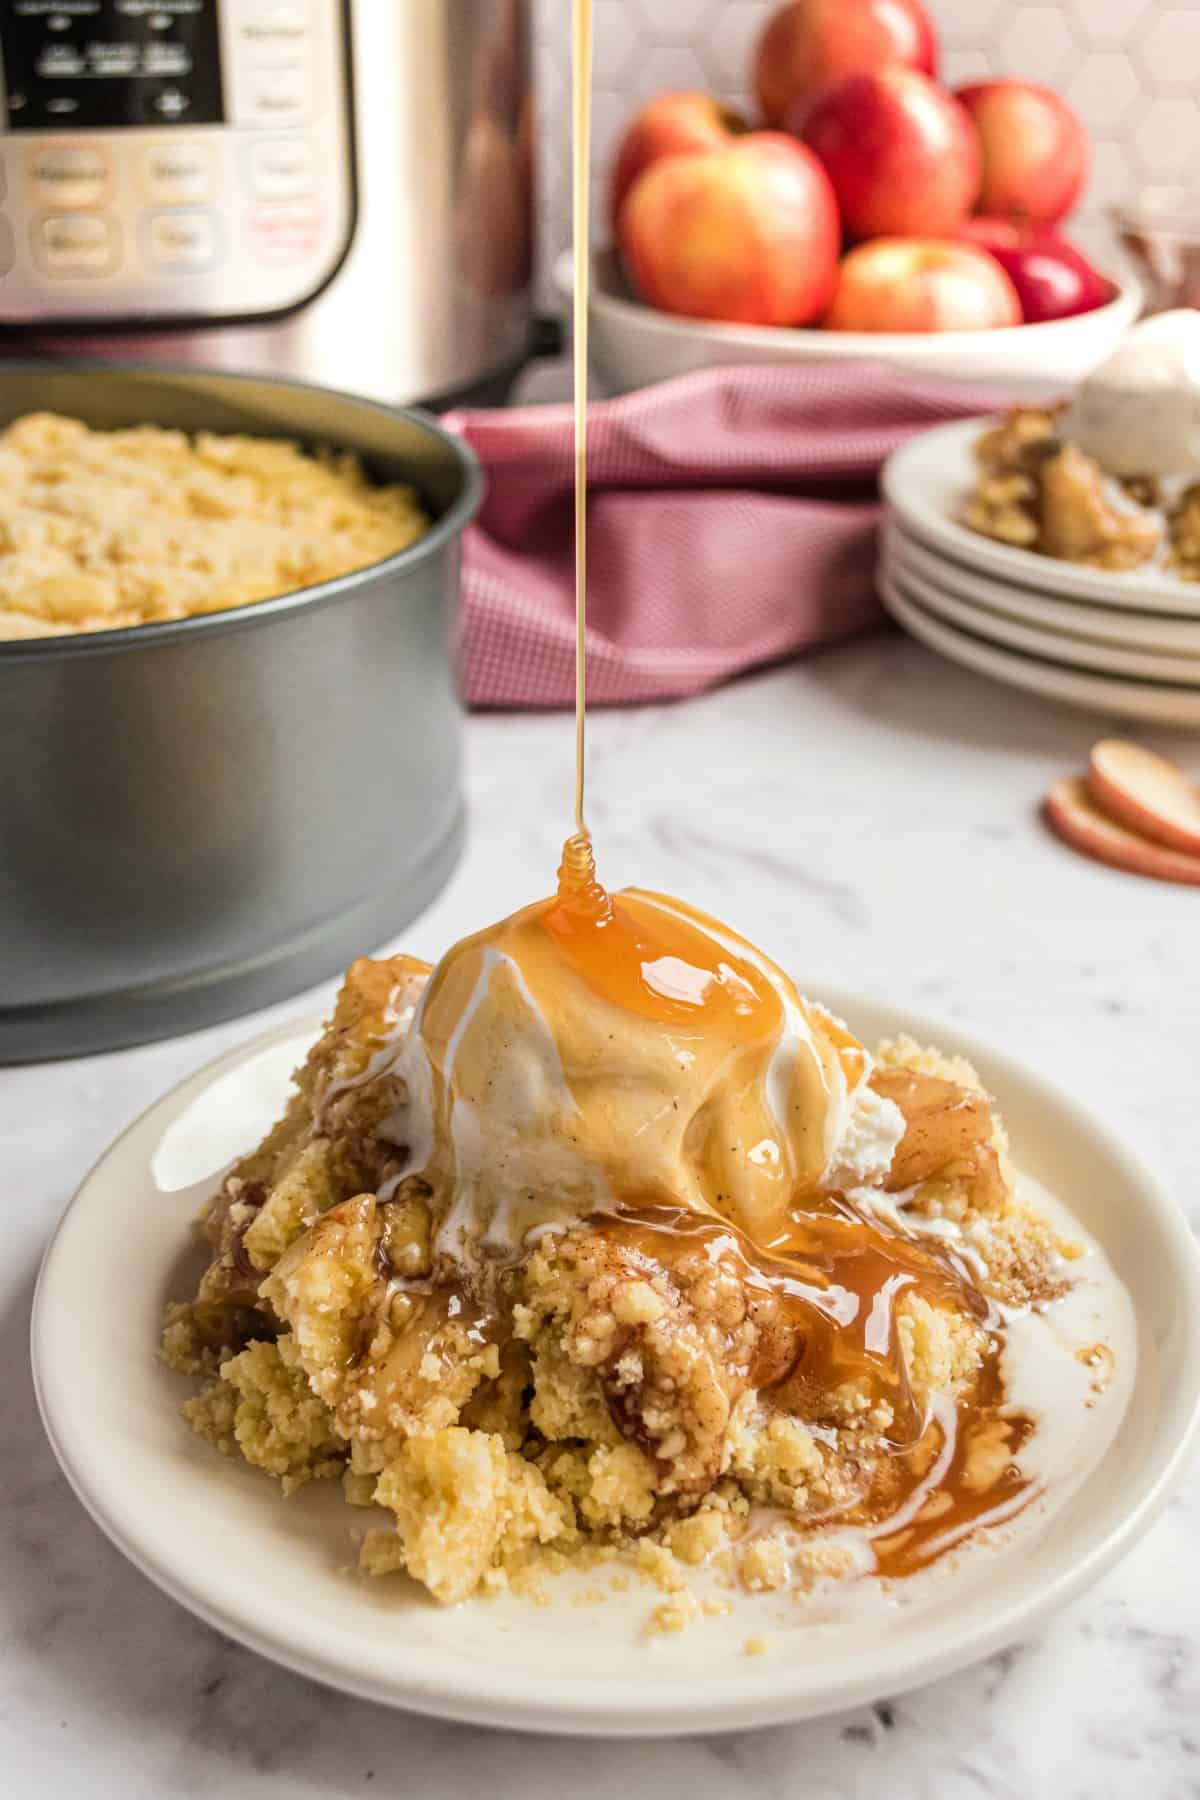 Apple cobbler on a plate with caramel sauce and ice cream.